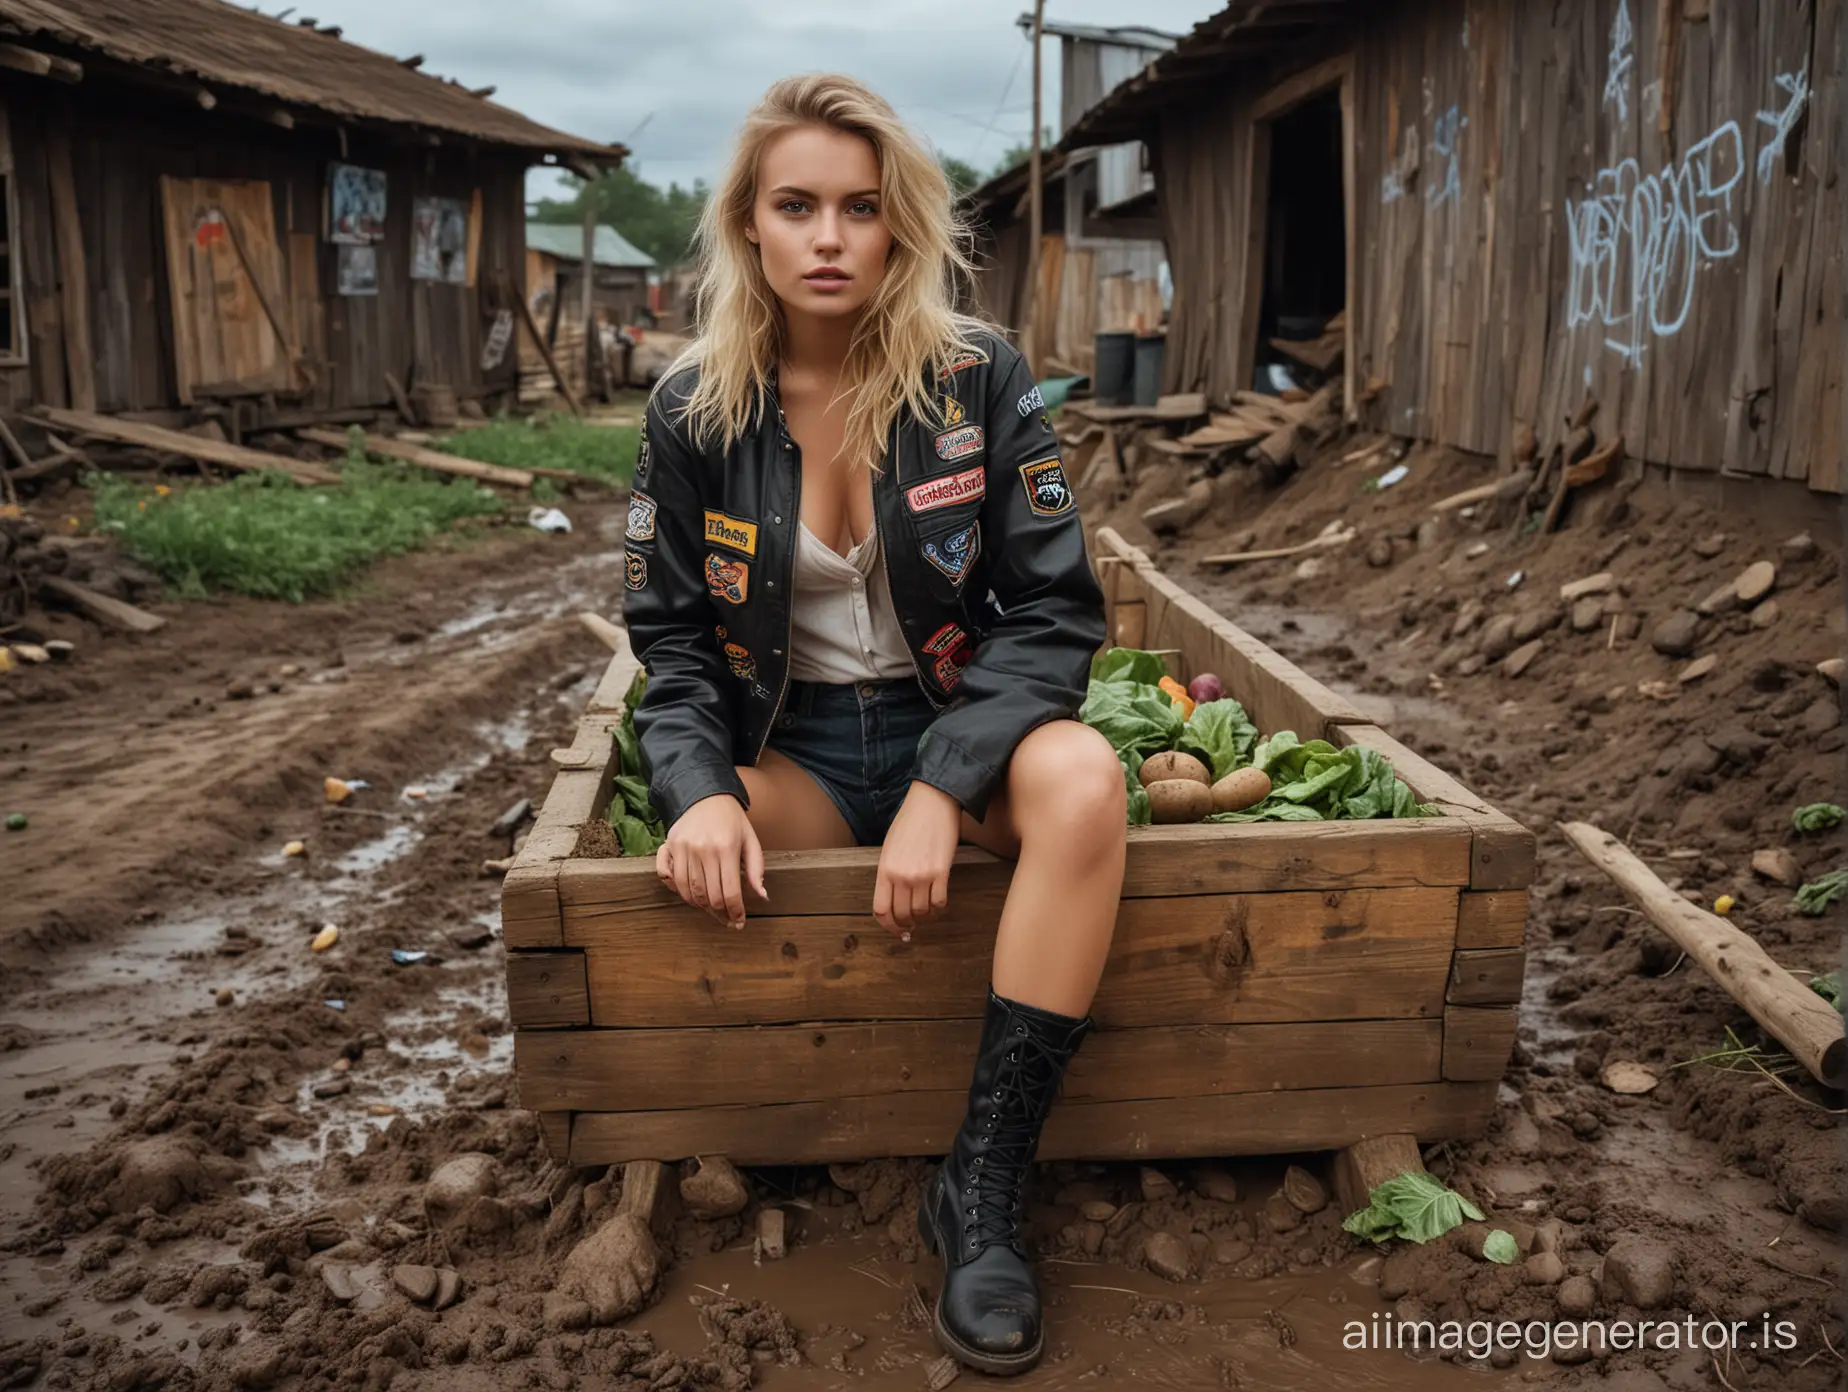 Blonde-Rebellious-SurferStyle-Woman-Stirring-Food-in-Old-Russian-Village